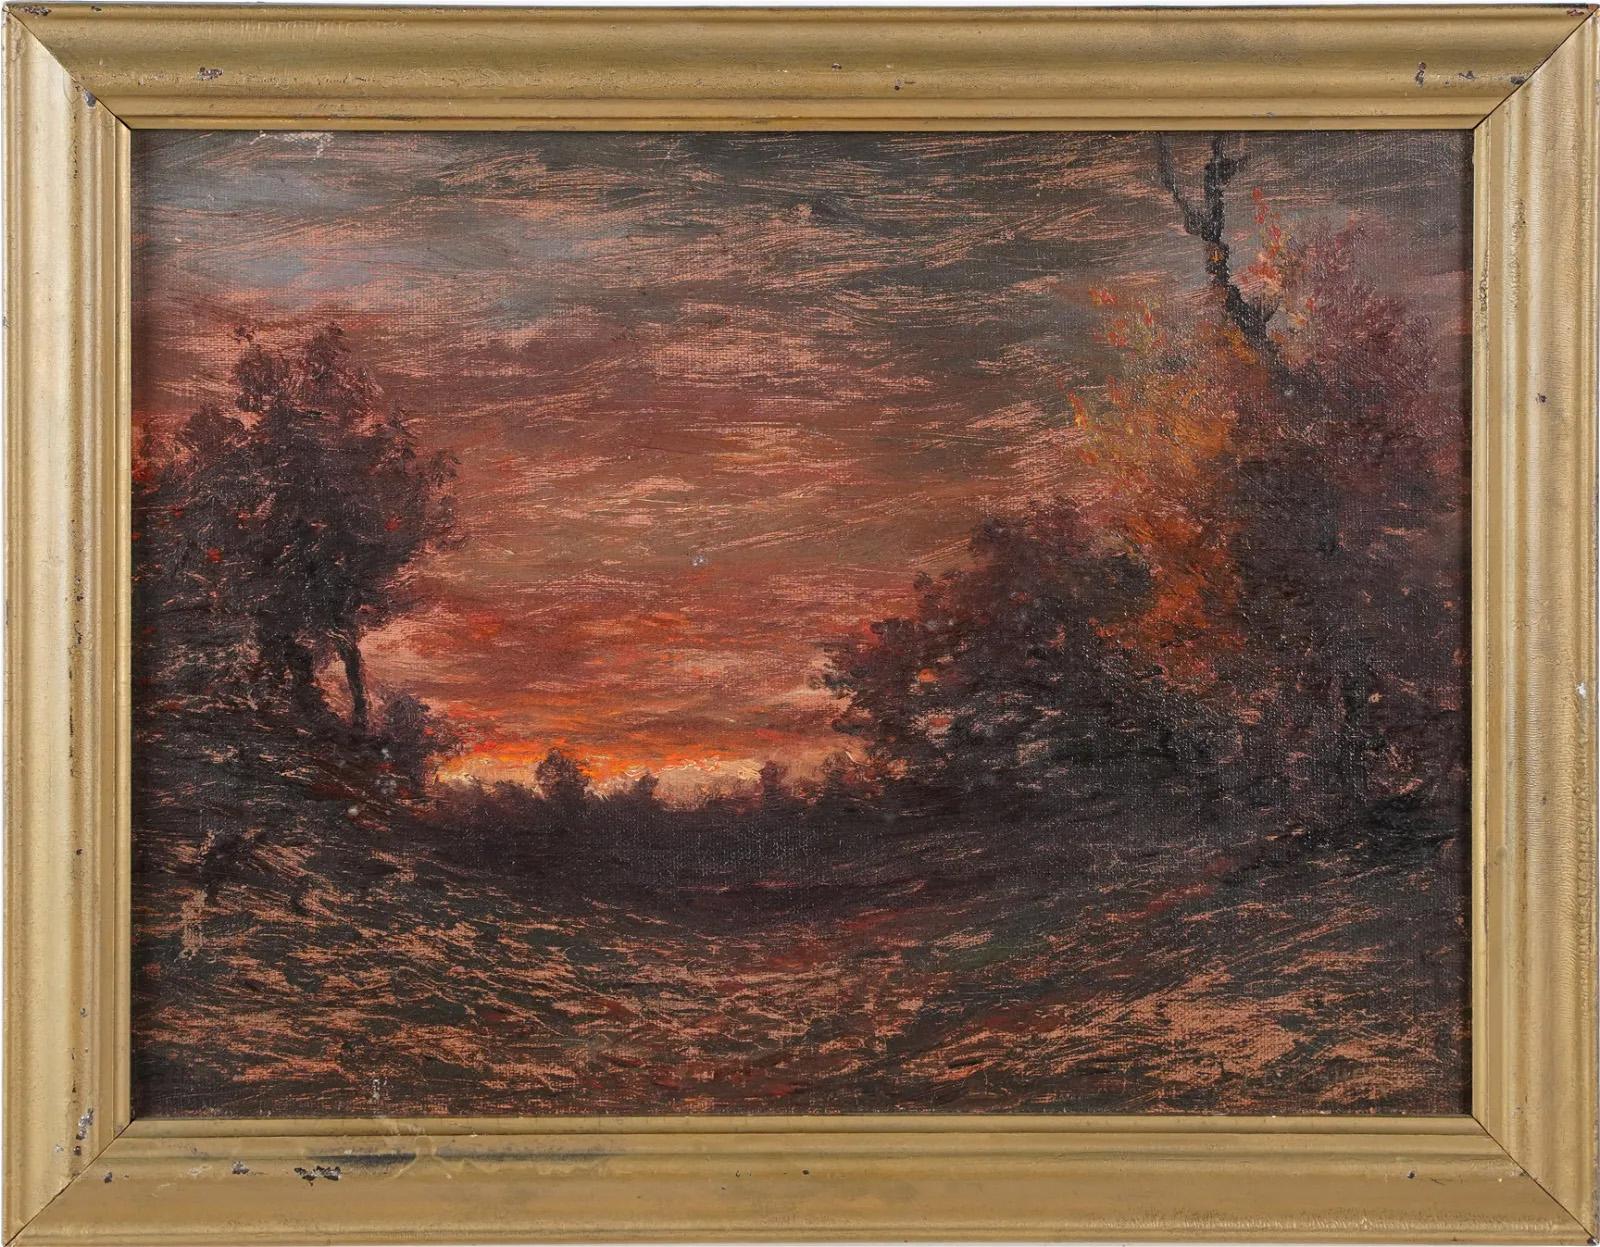 Very nicely painted 19th century American landscape painting.  Oil on canvas.  Framed.  Image size, 12H x 16L.   Signed illegibly.  